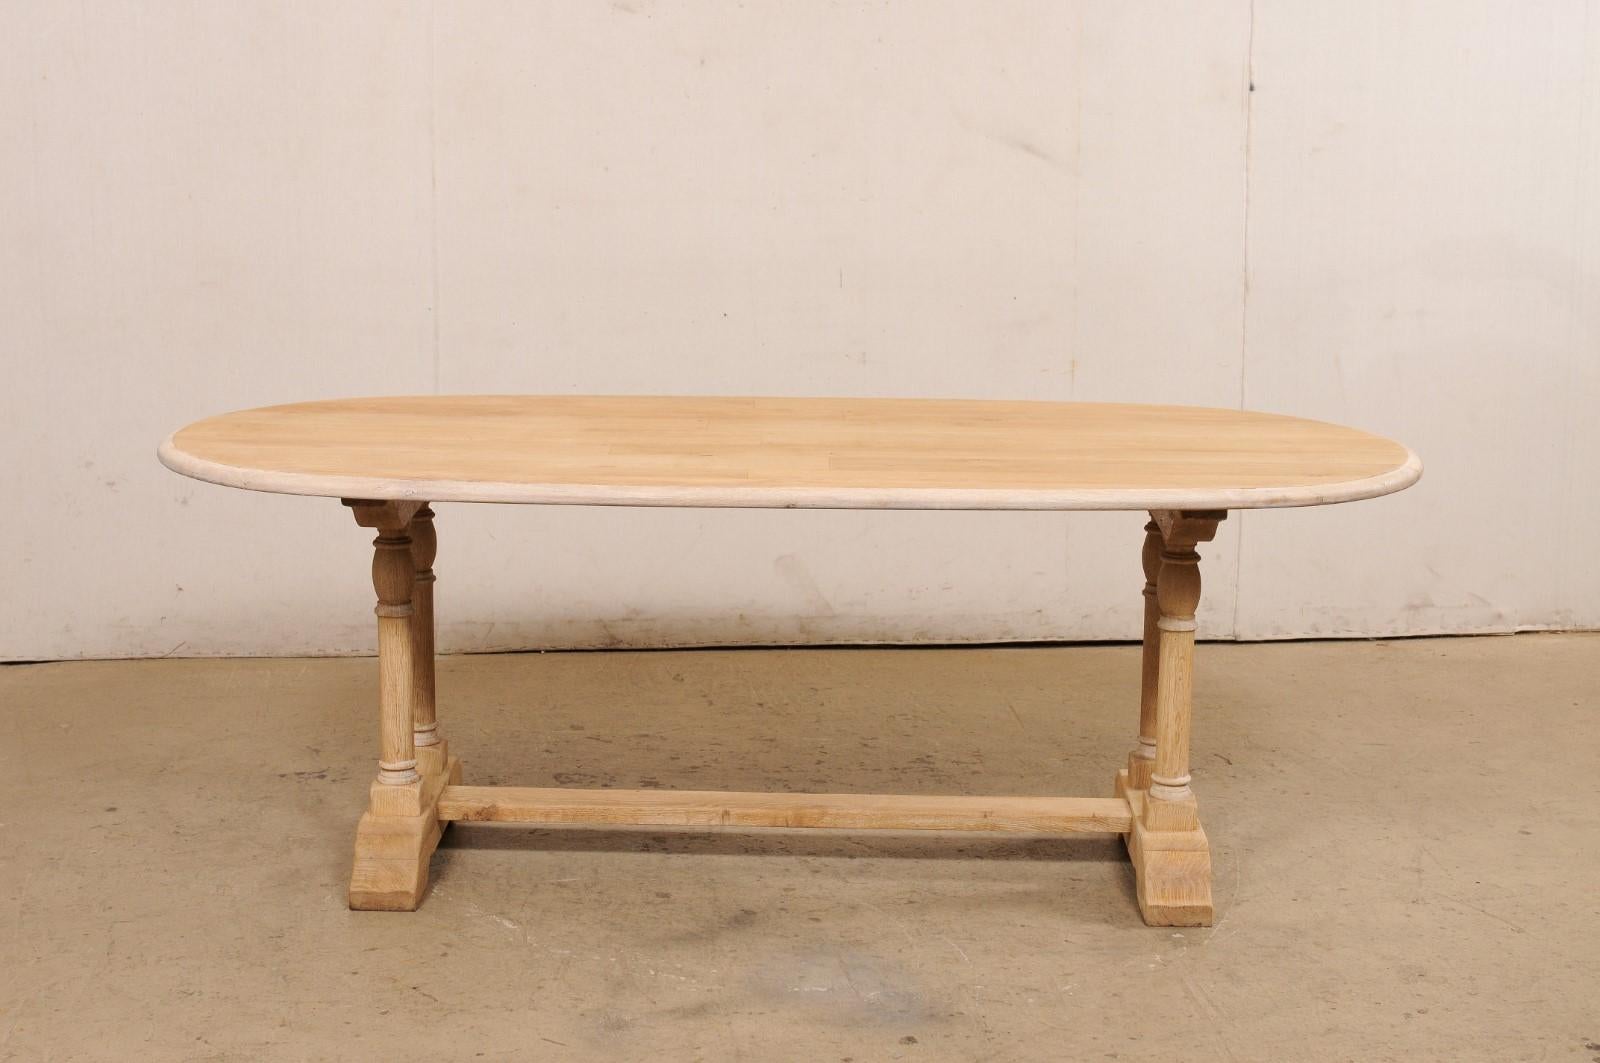 A French Oval-Shaped Bleached Wood Trestle Dining Table, Mid 20th Century For Sale 6